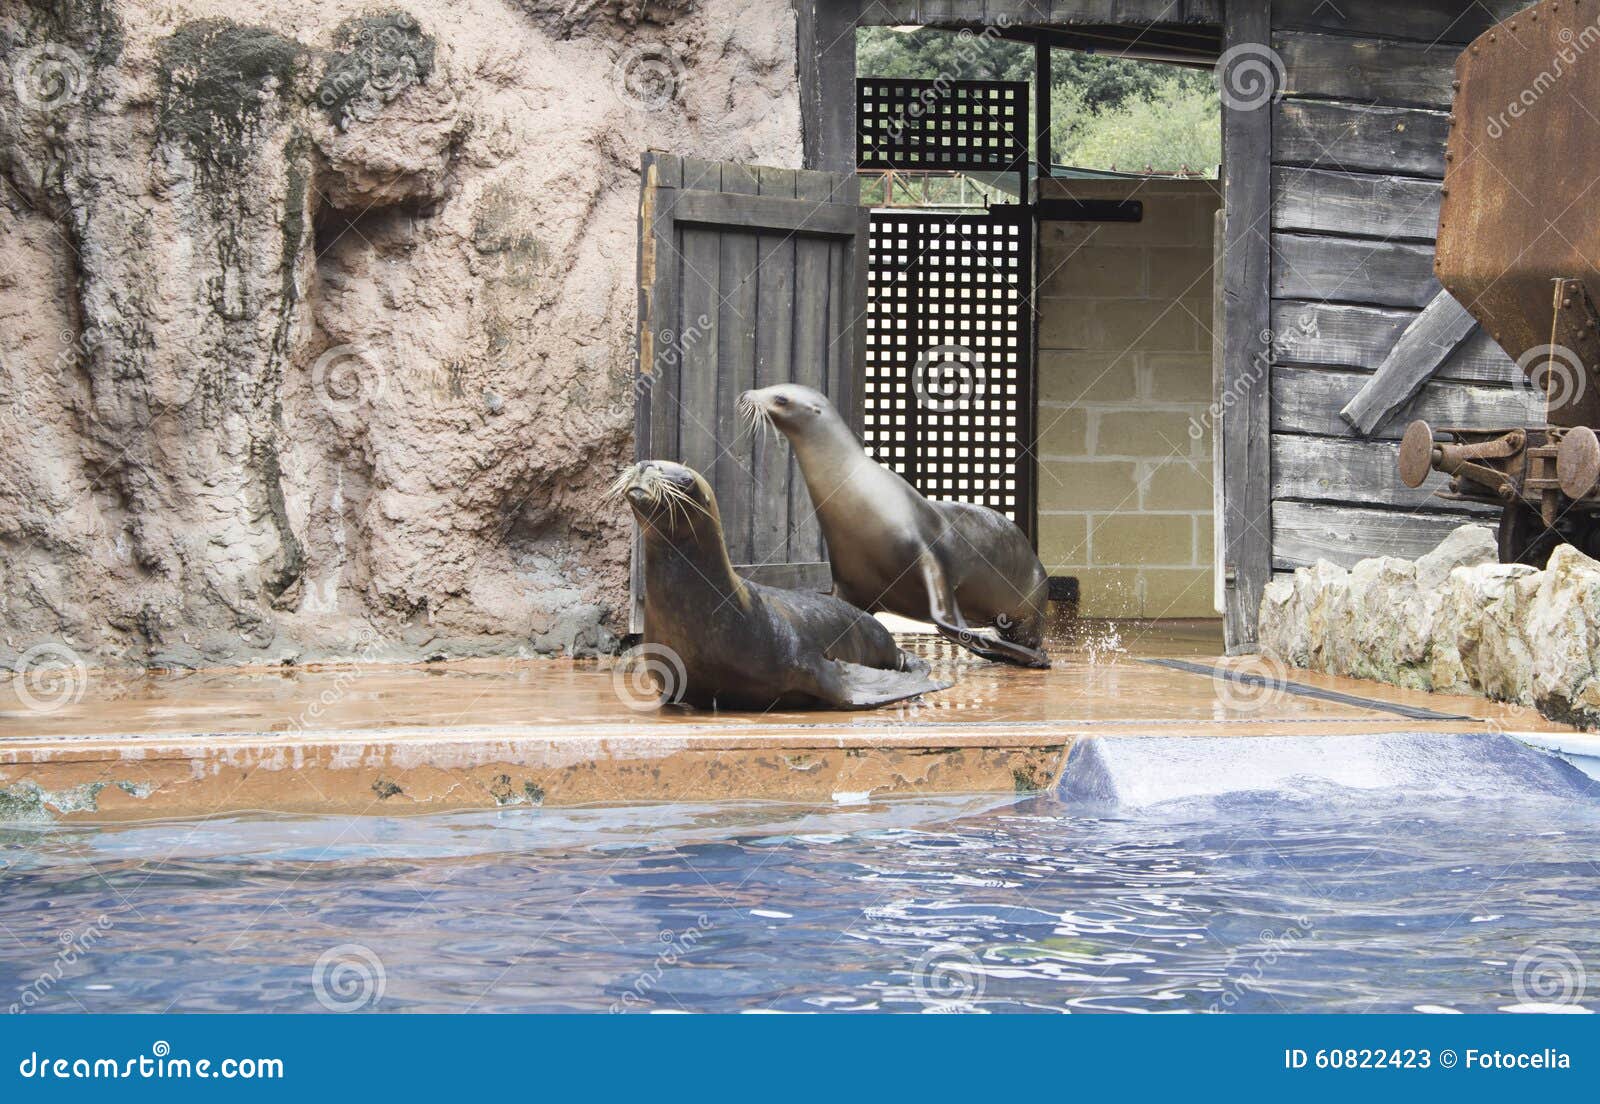 Sea lions stock image. Image of play, performing, happy - 60822423